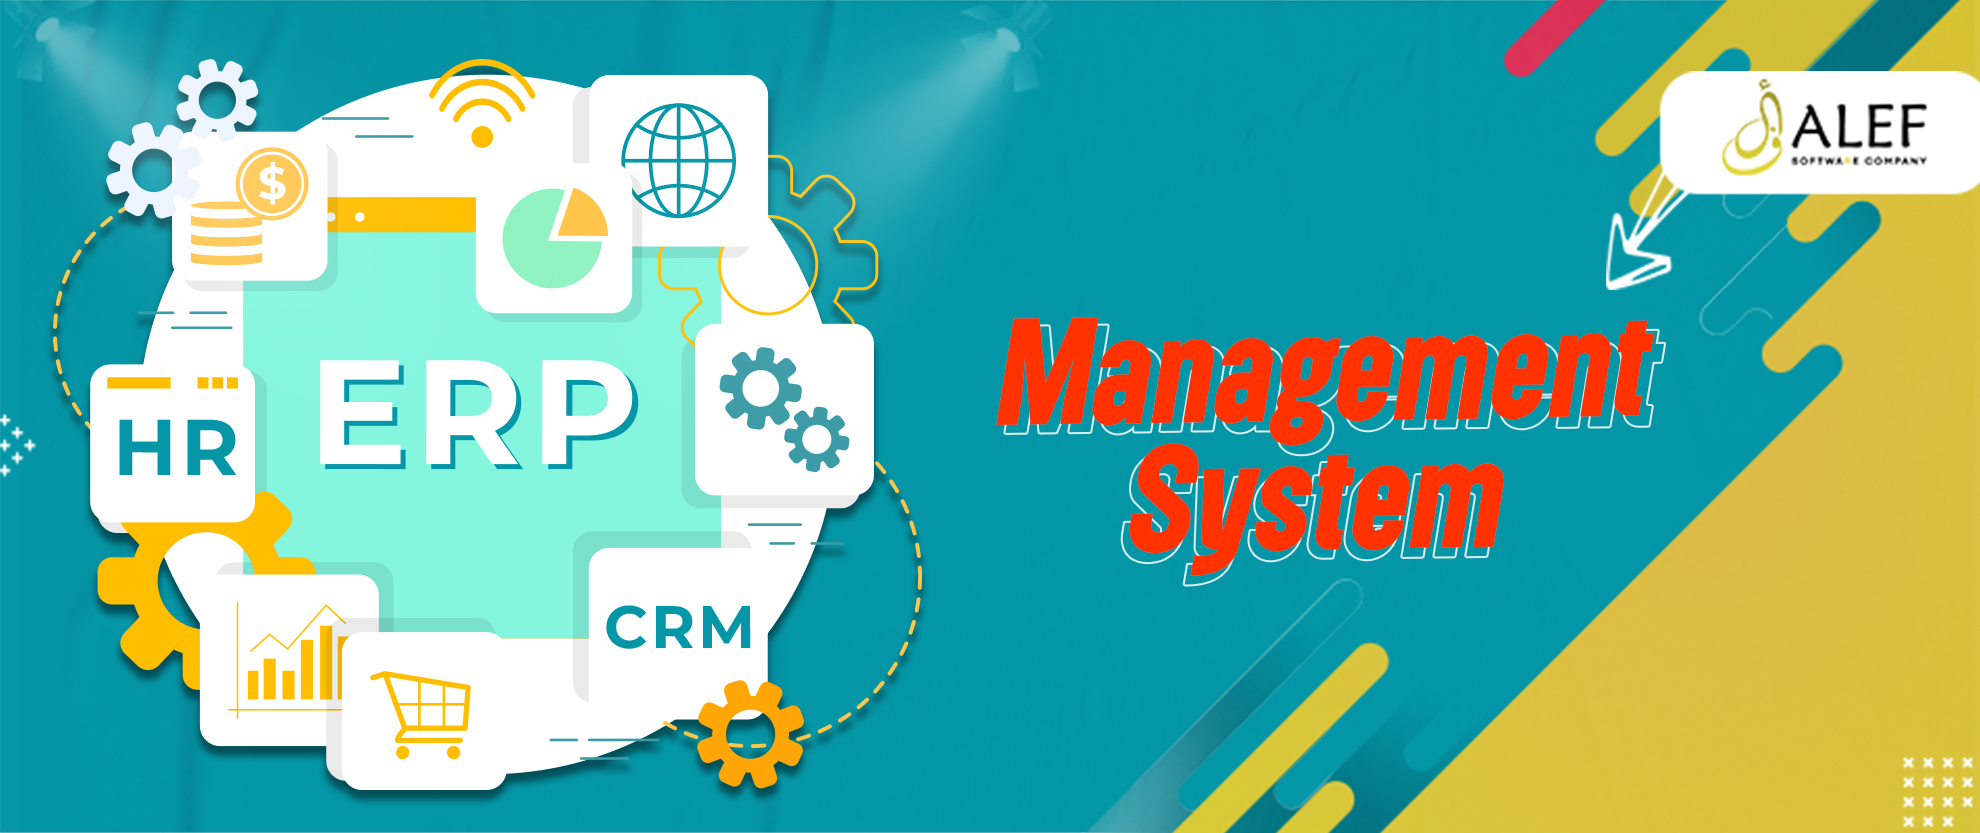  Management Systems 